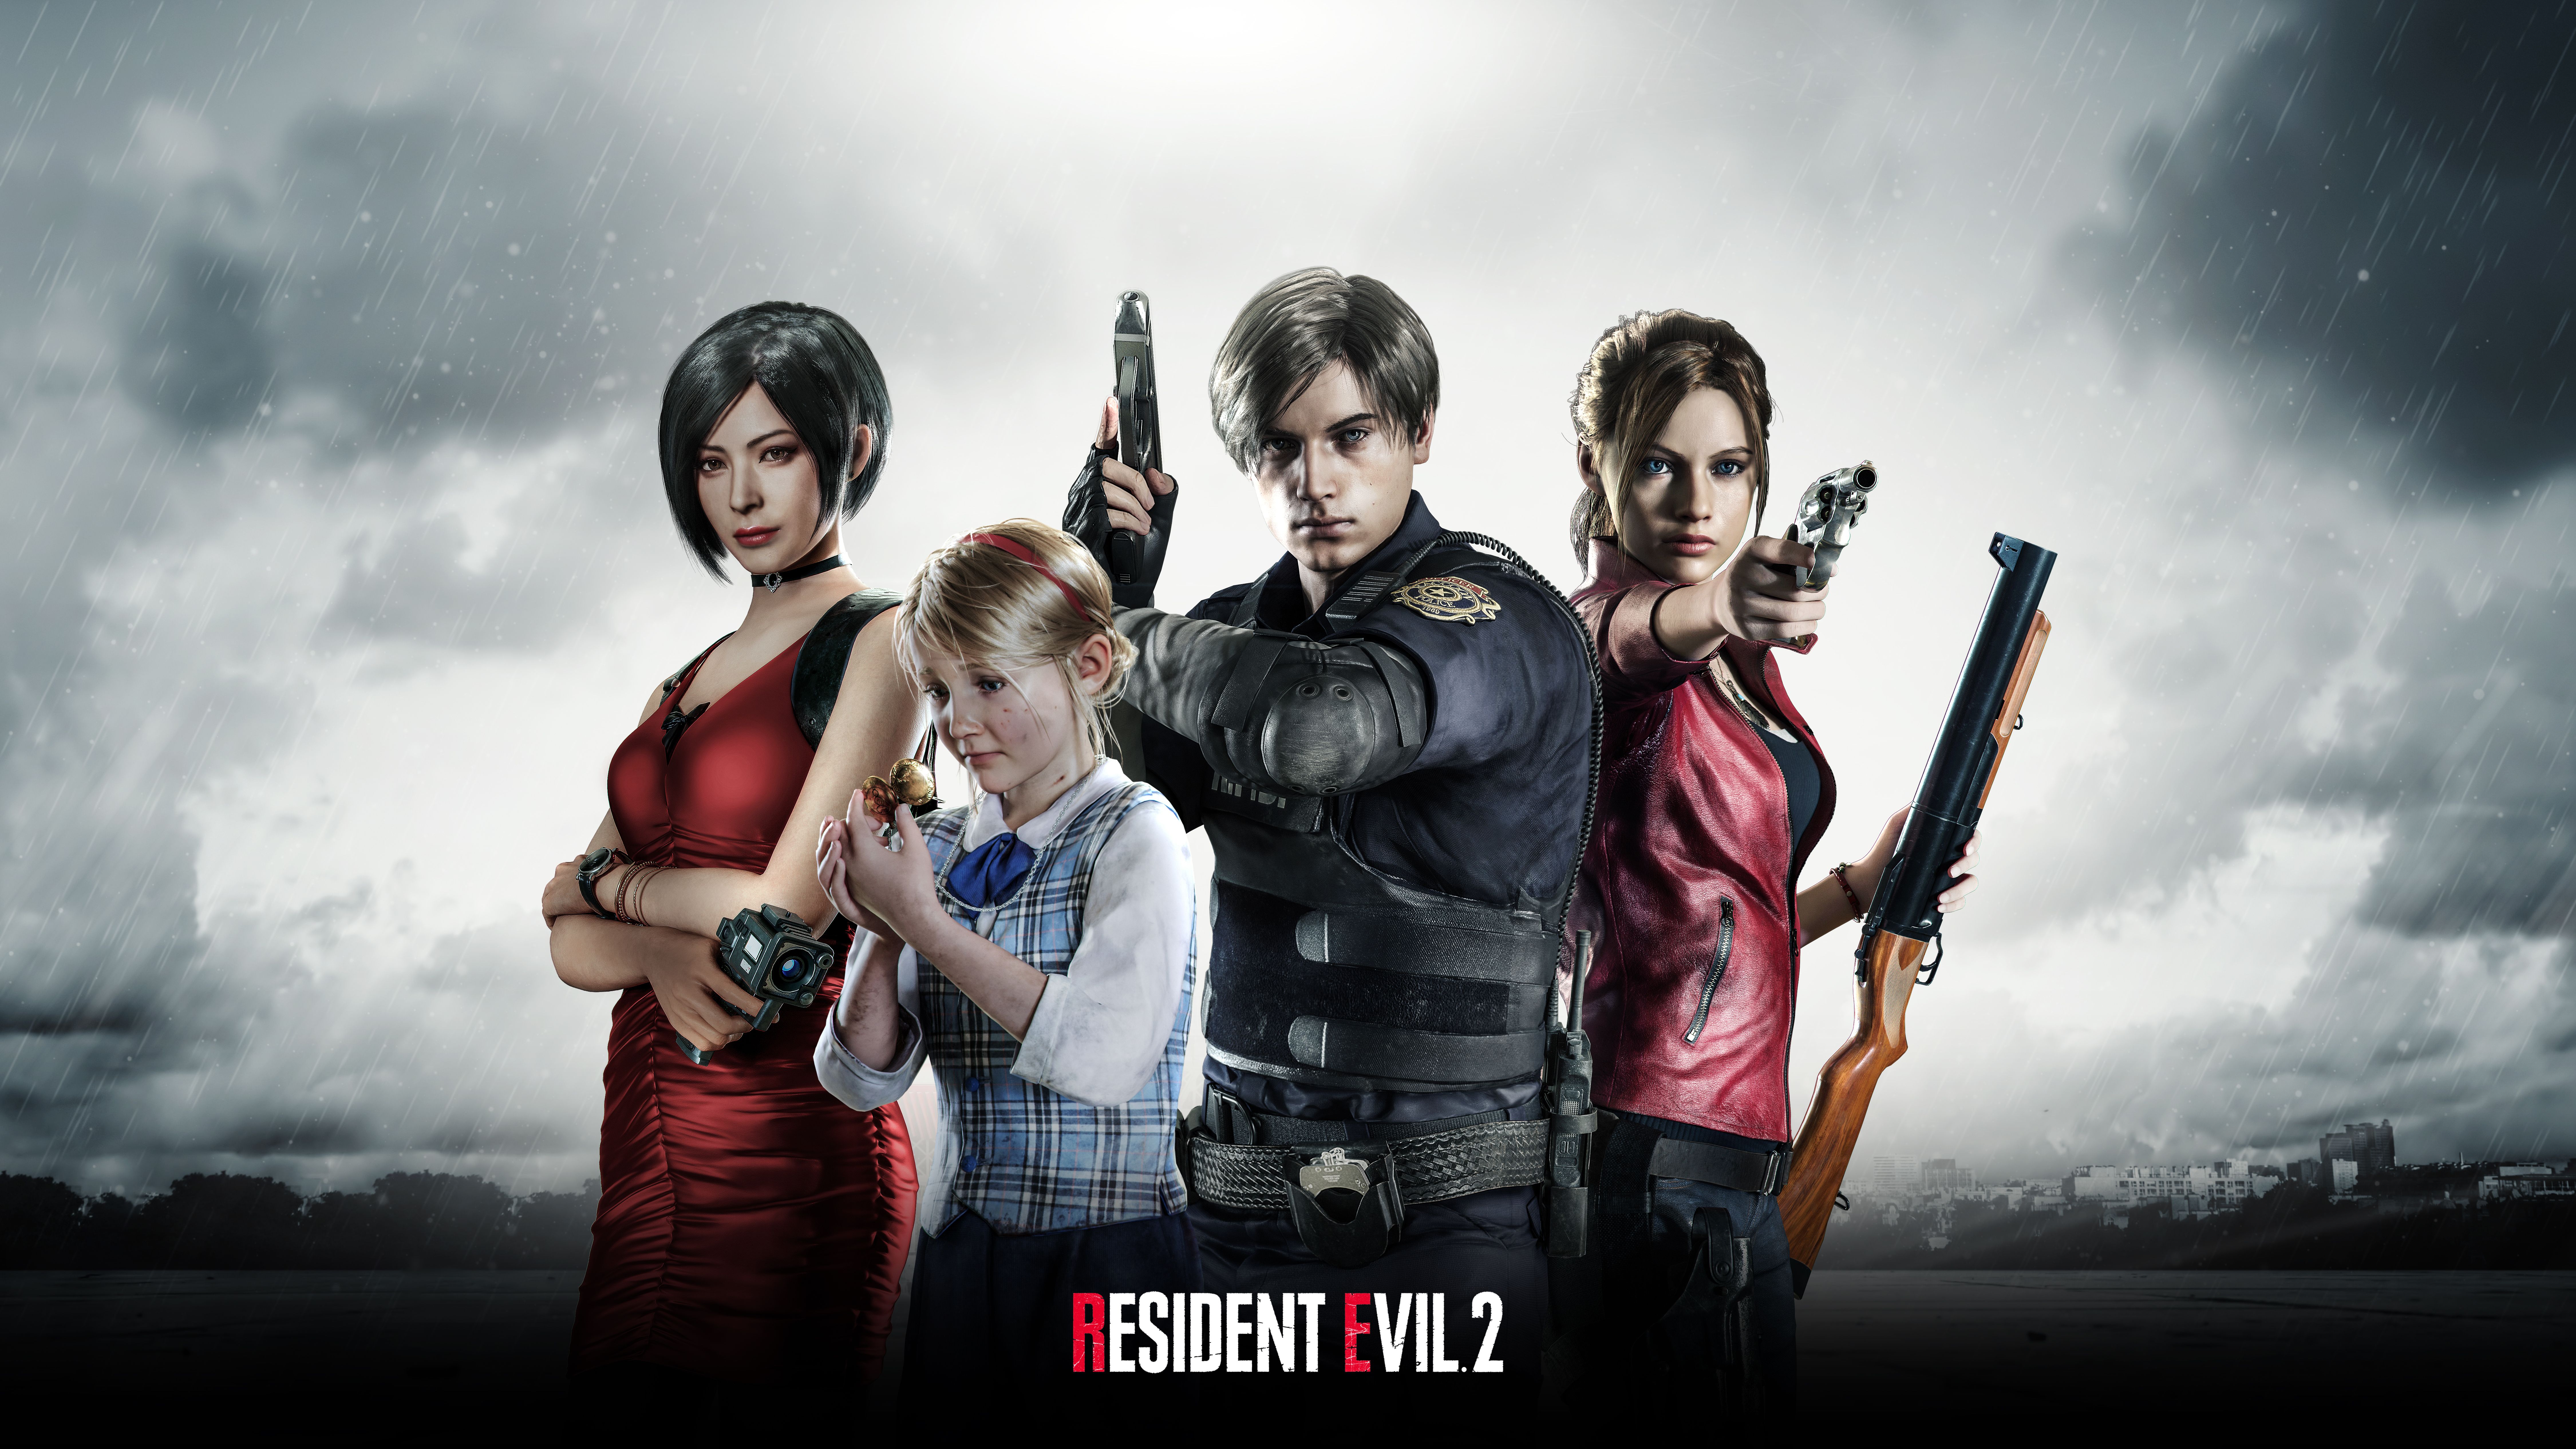 Video Game Resident Evil 2 (2019) HD Wallpaper | Background Image